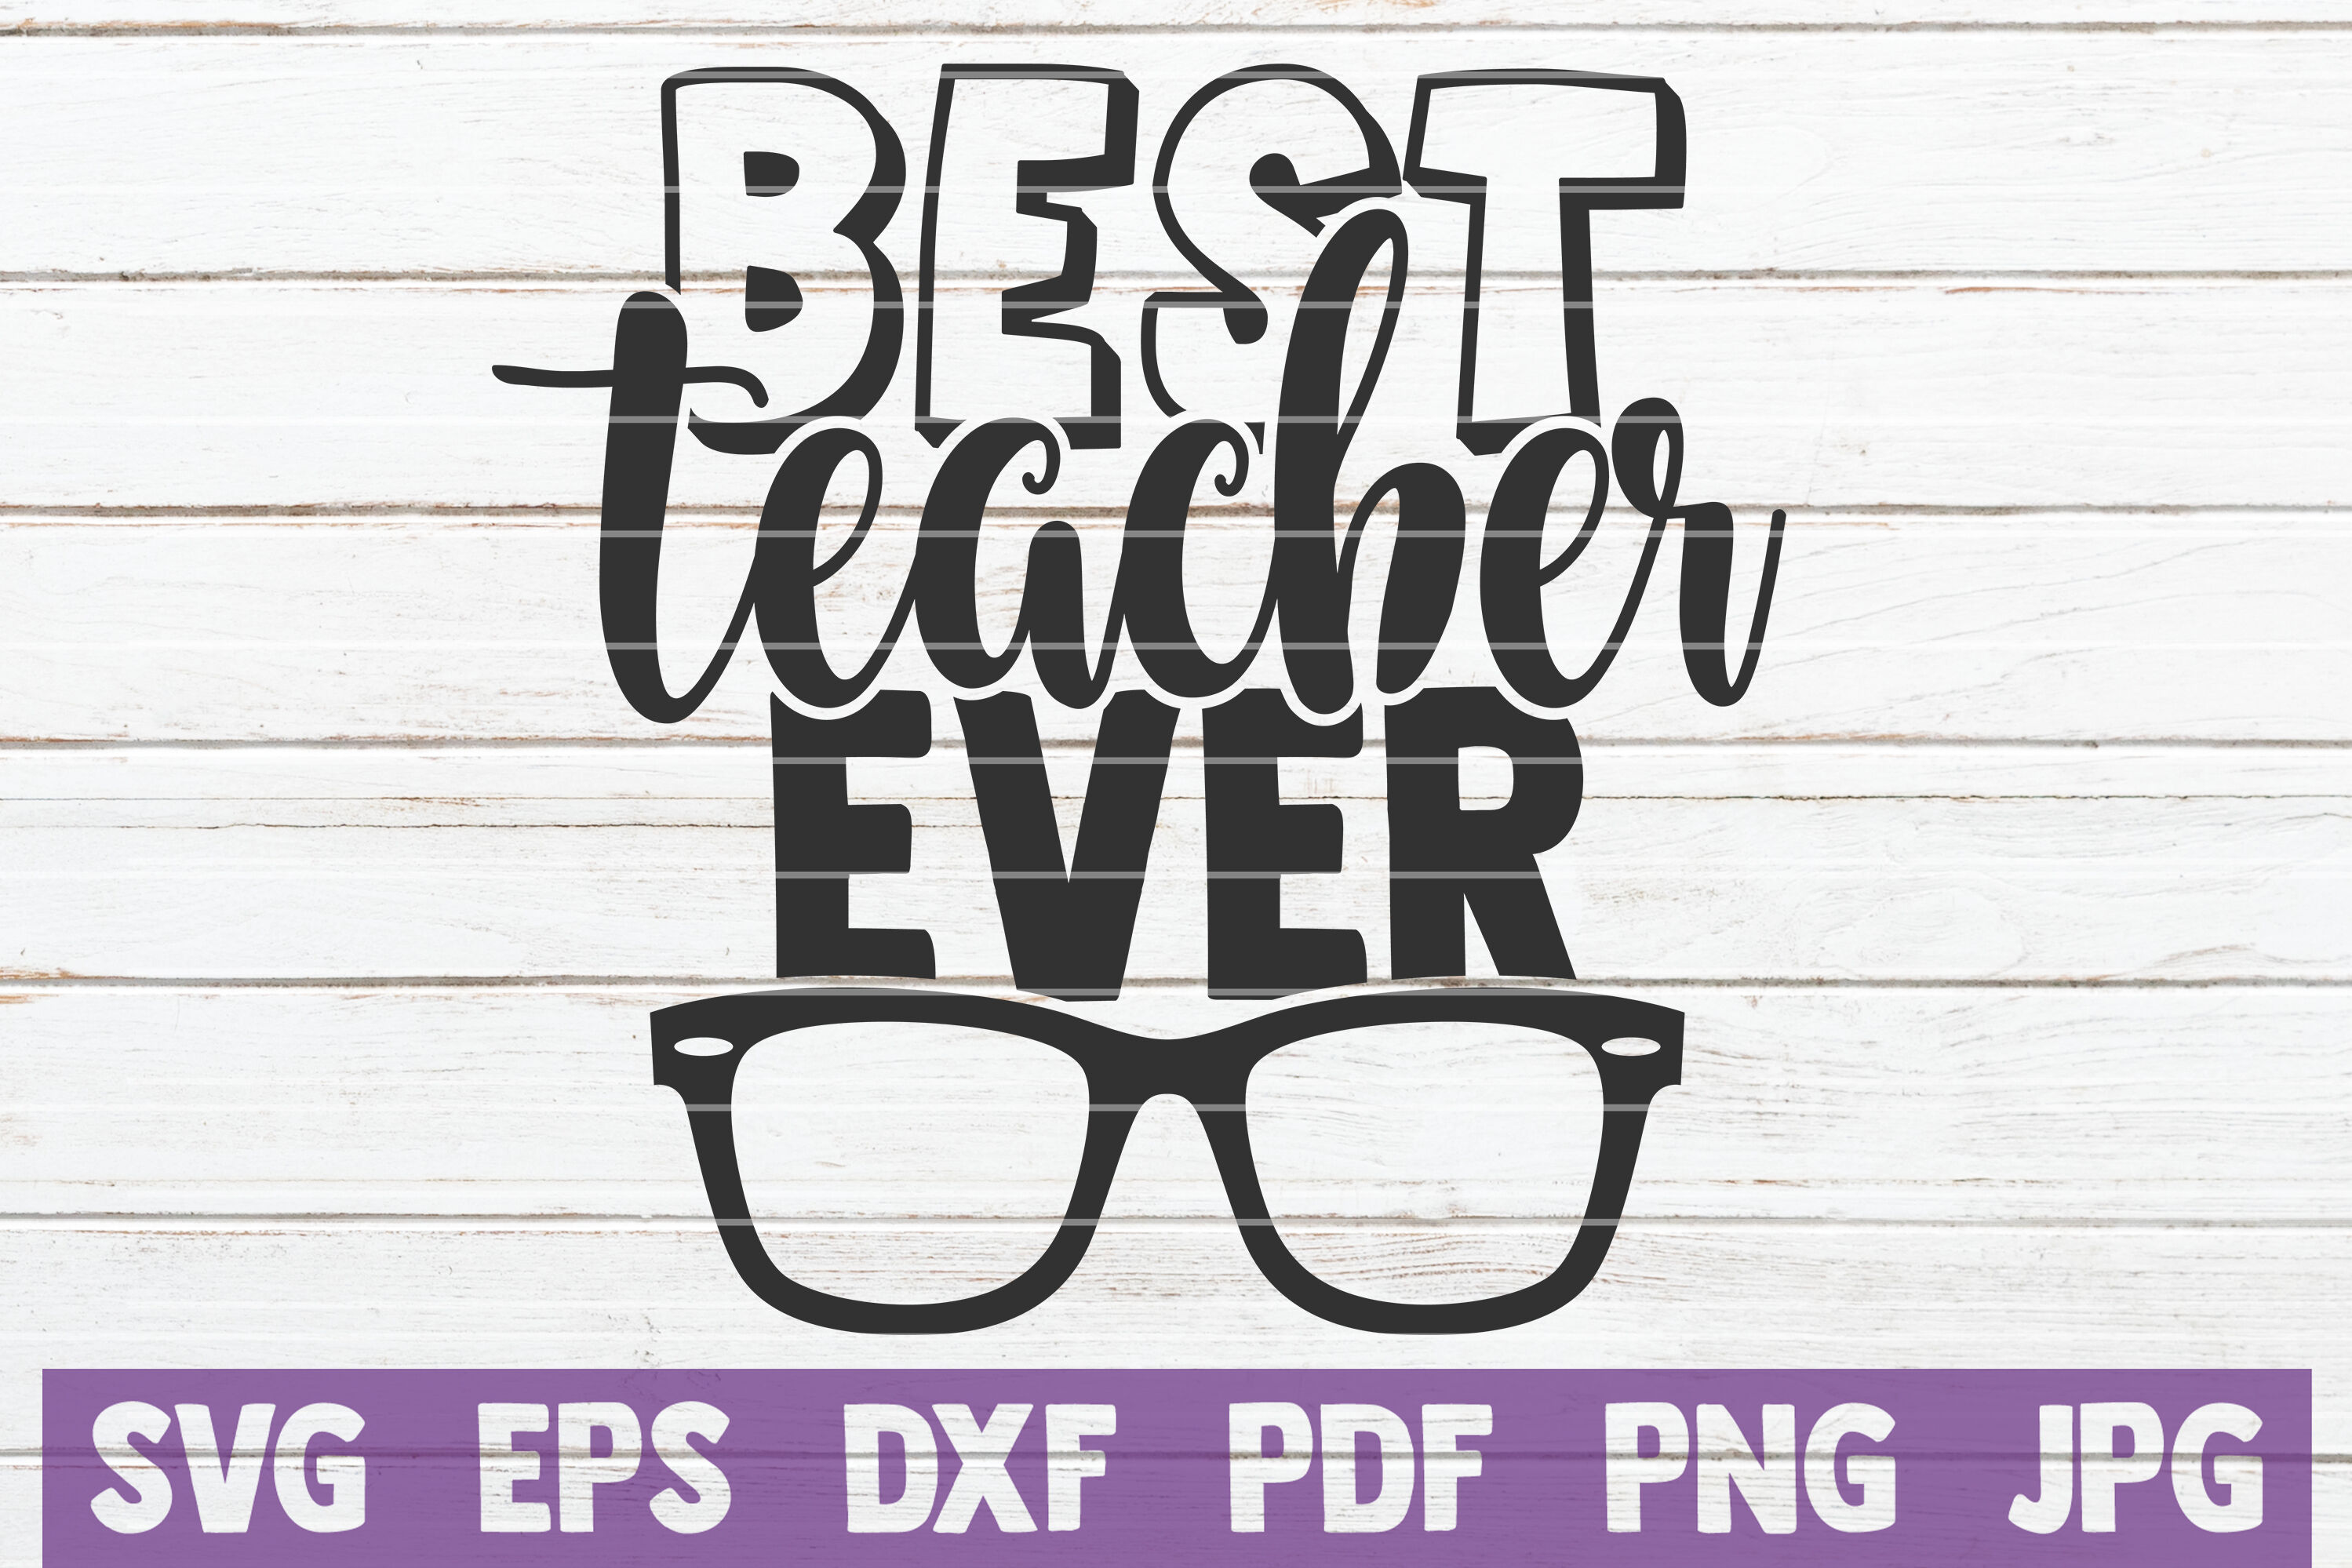 Download Best Teacher Ever SVG Cut File By MintyMarshmallows | TheHungryJPEG.com